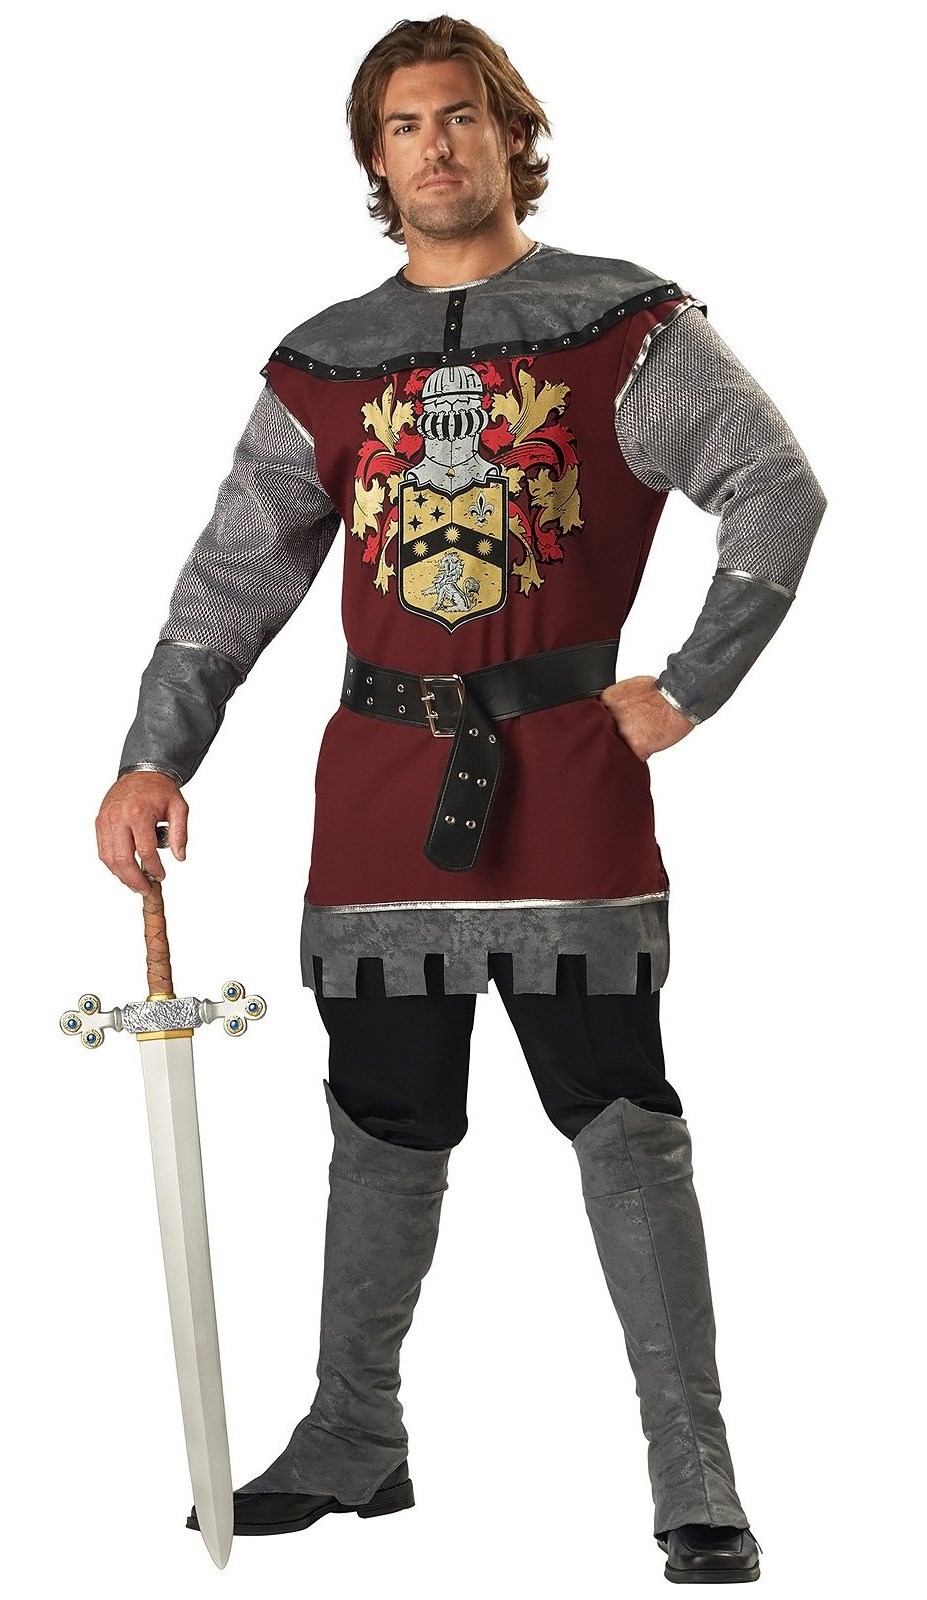 Noble Knight Adult Costume